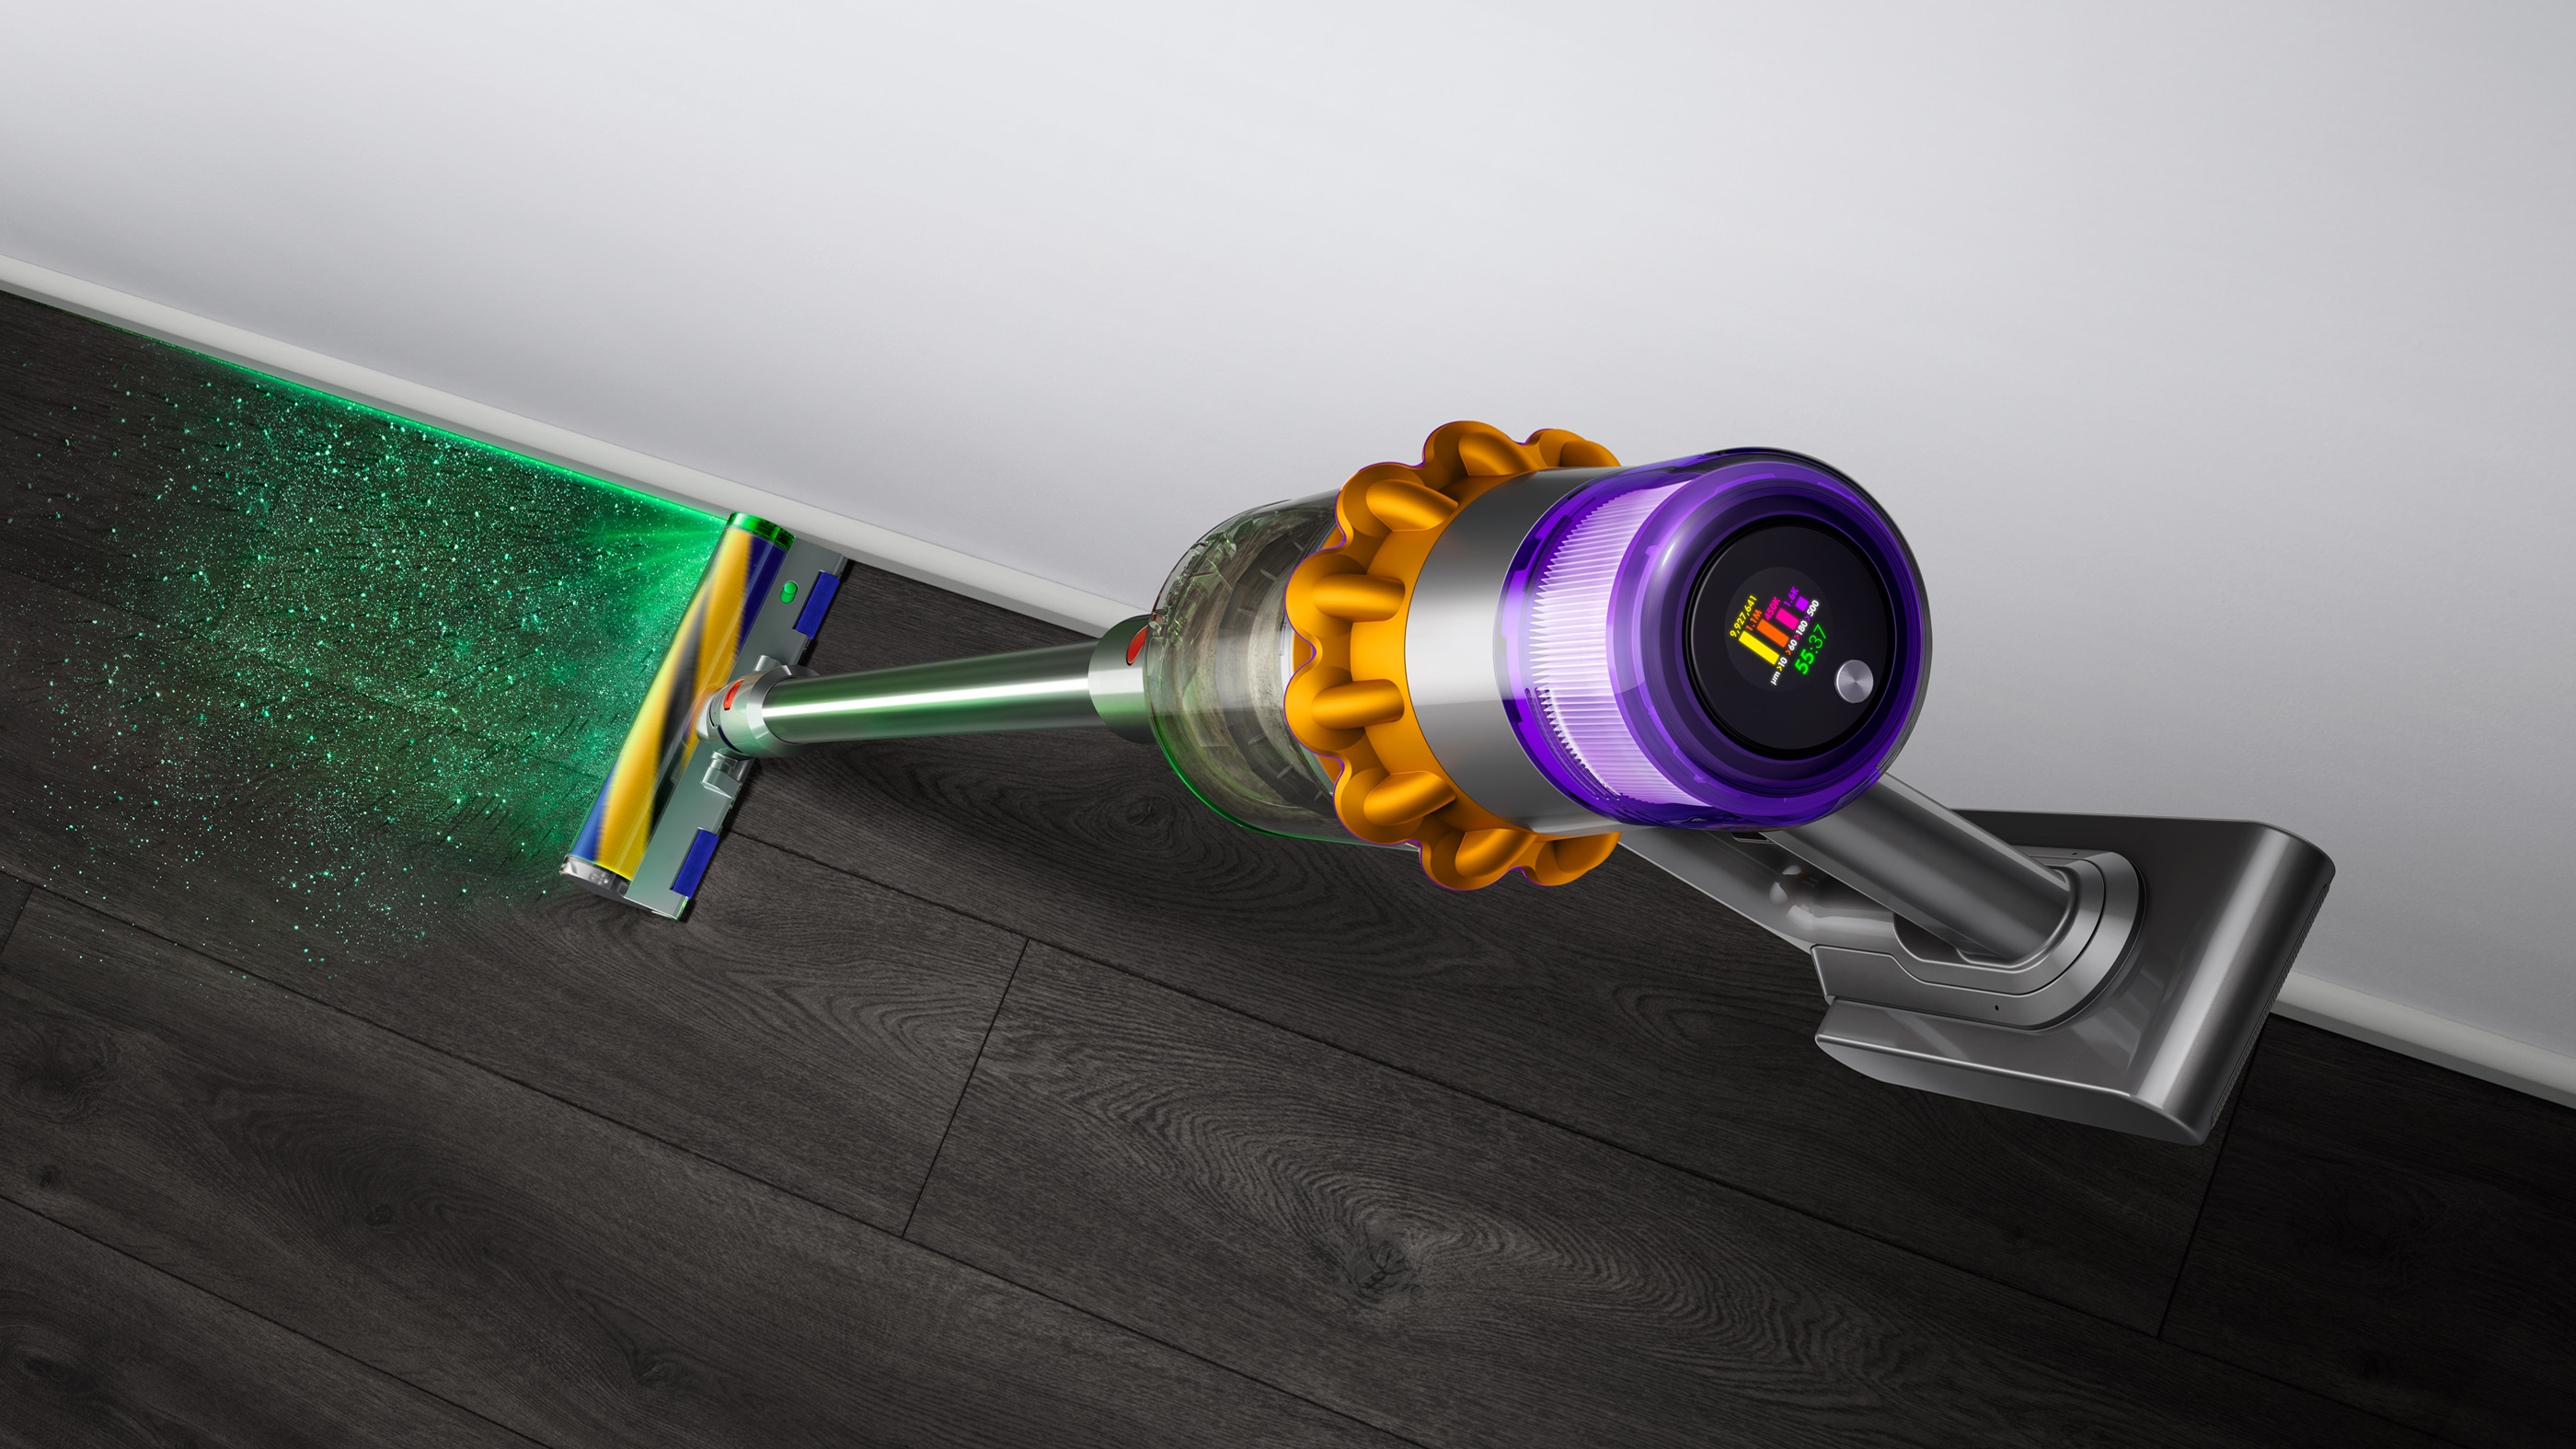 The Dyson V15 Detect being used to clean hard floors